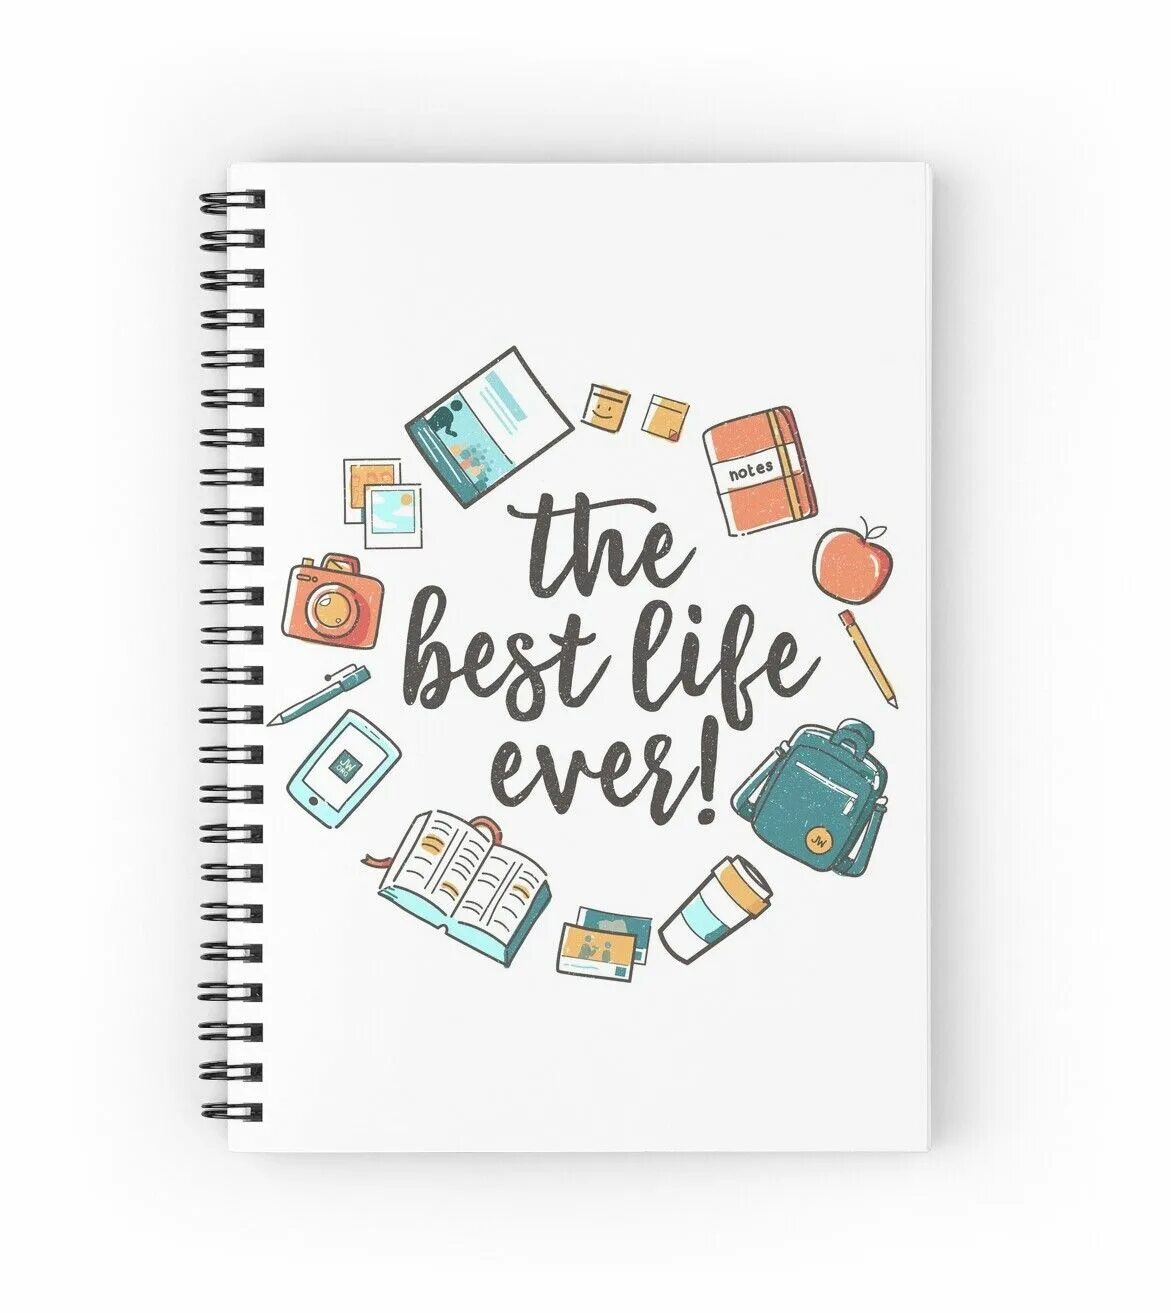 The best life ever. Ever Life Design.